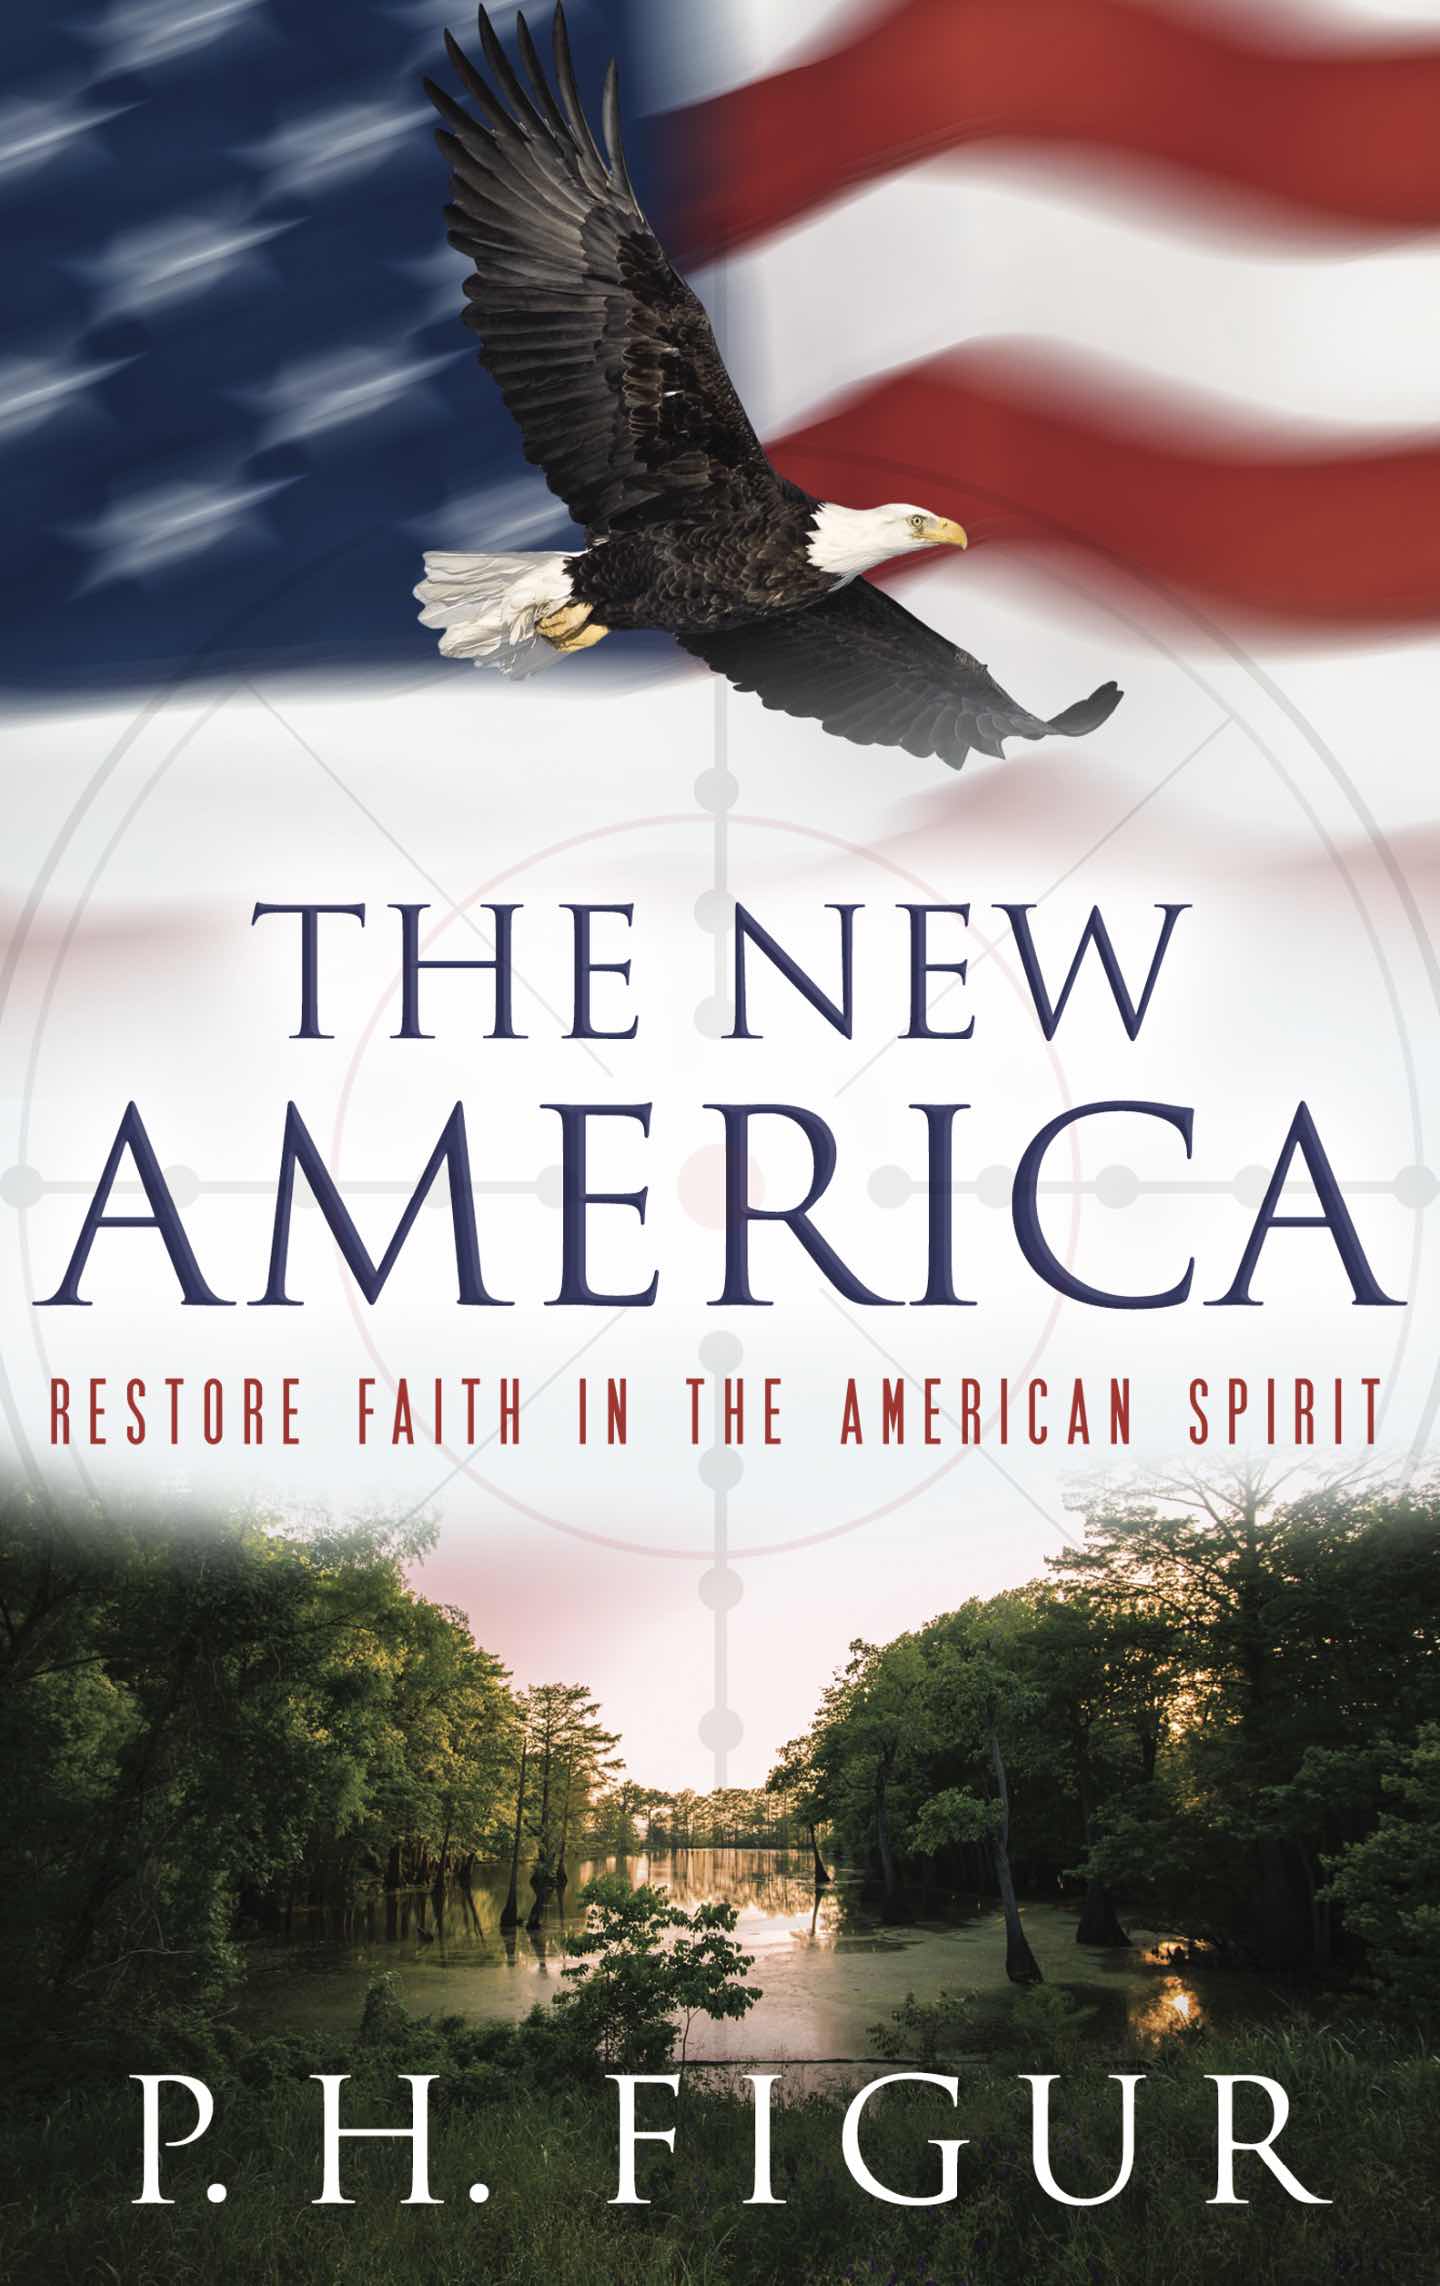 FREE: The New America by P.H. Figur